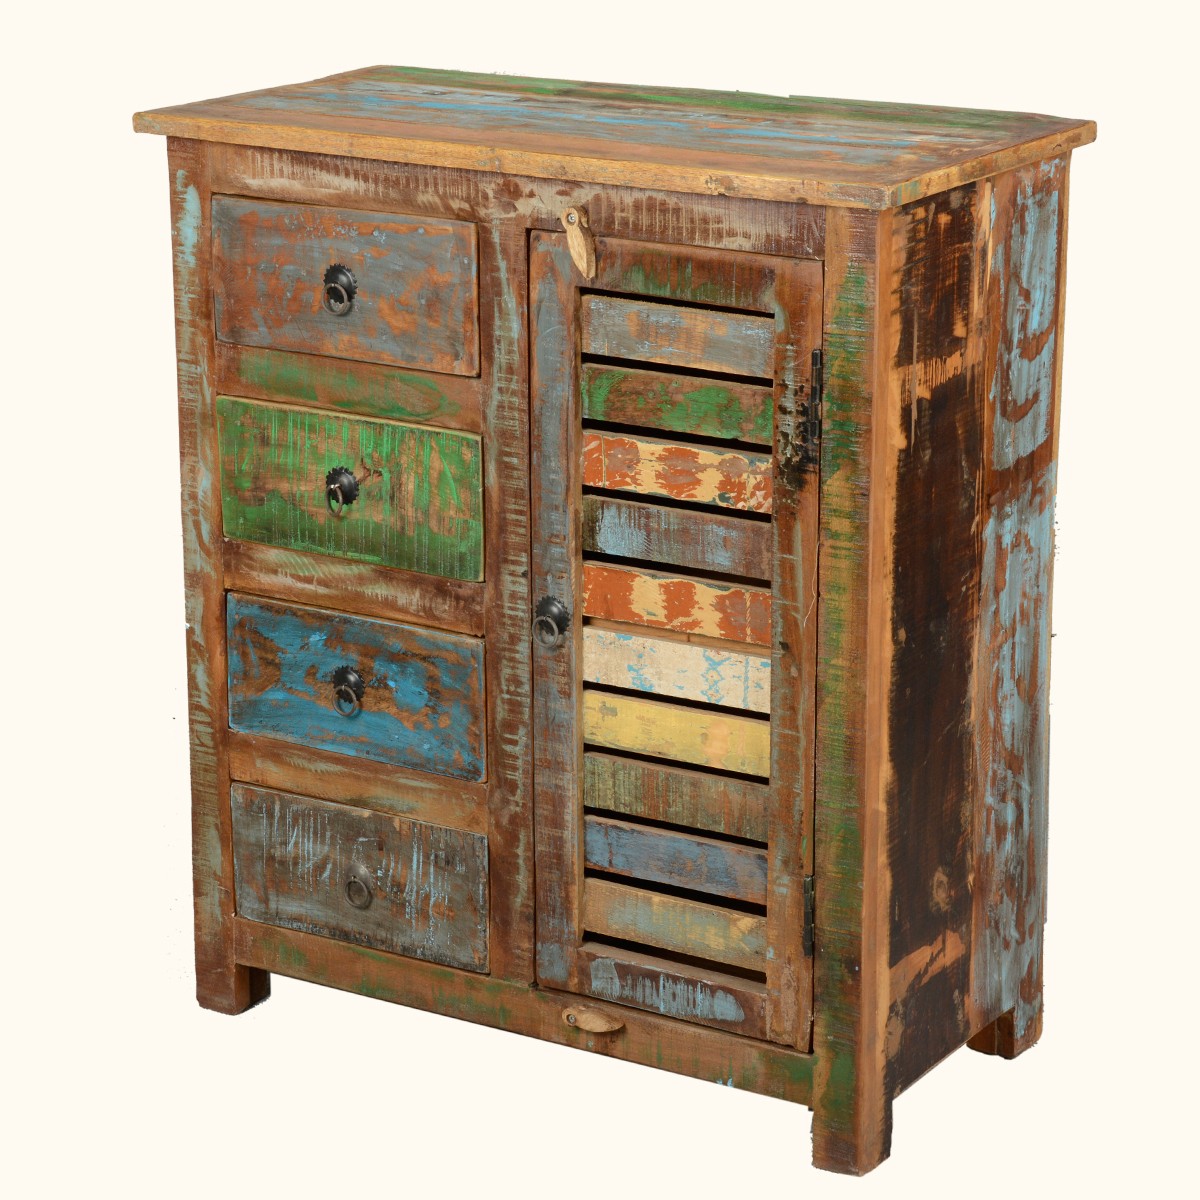 Reclaimed wood distressed rustic kitchen cabinet sideboard